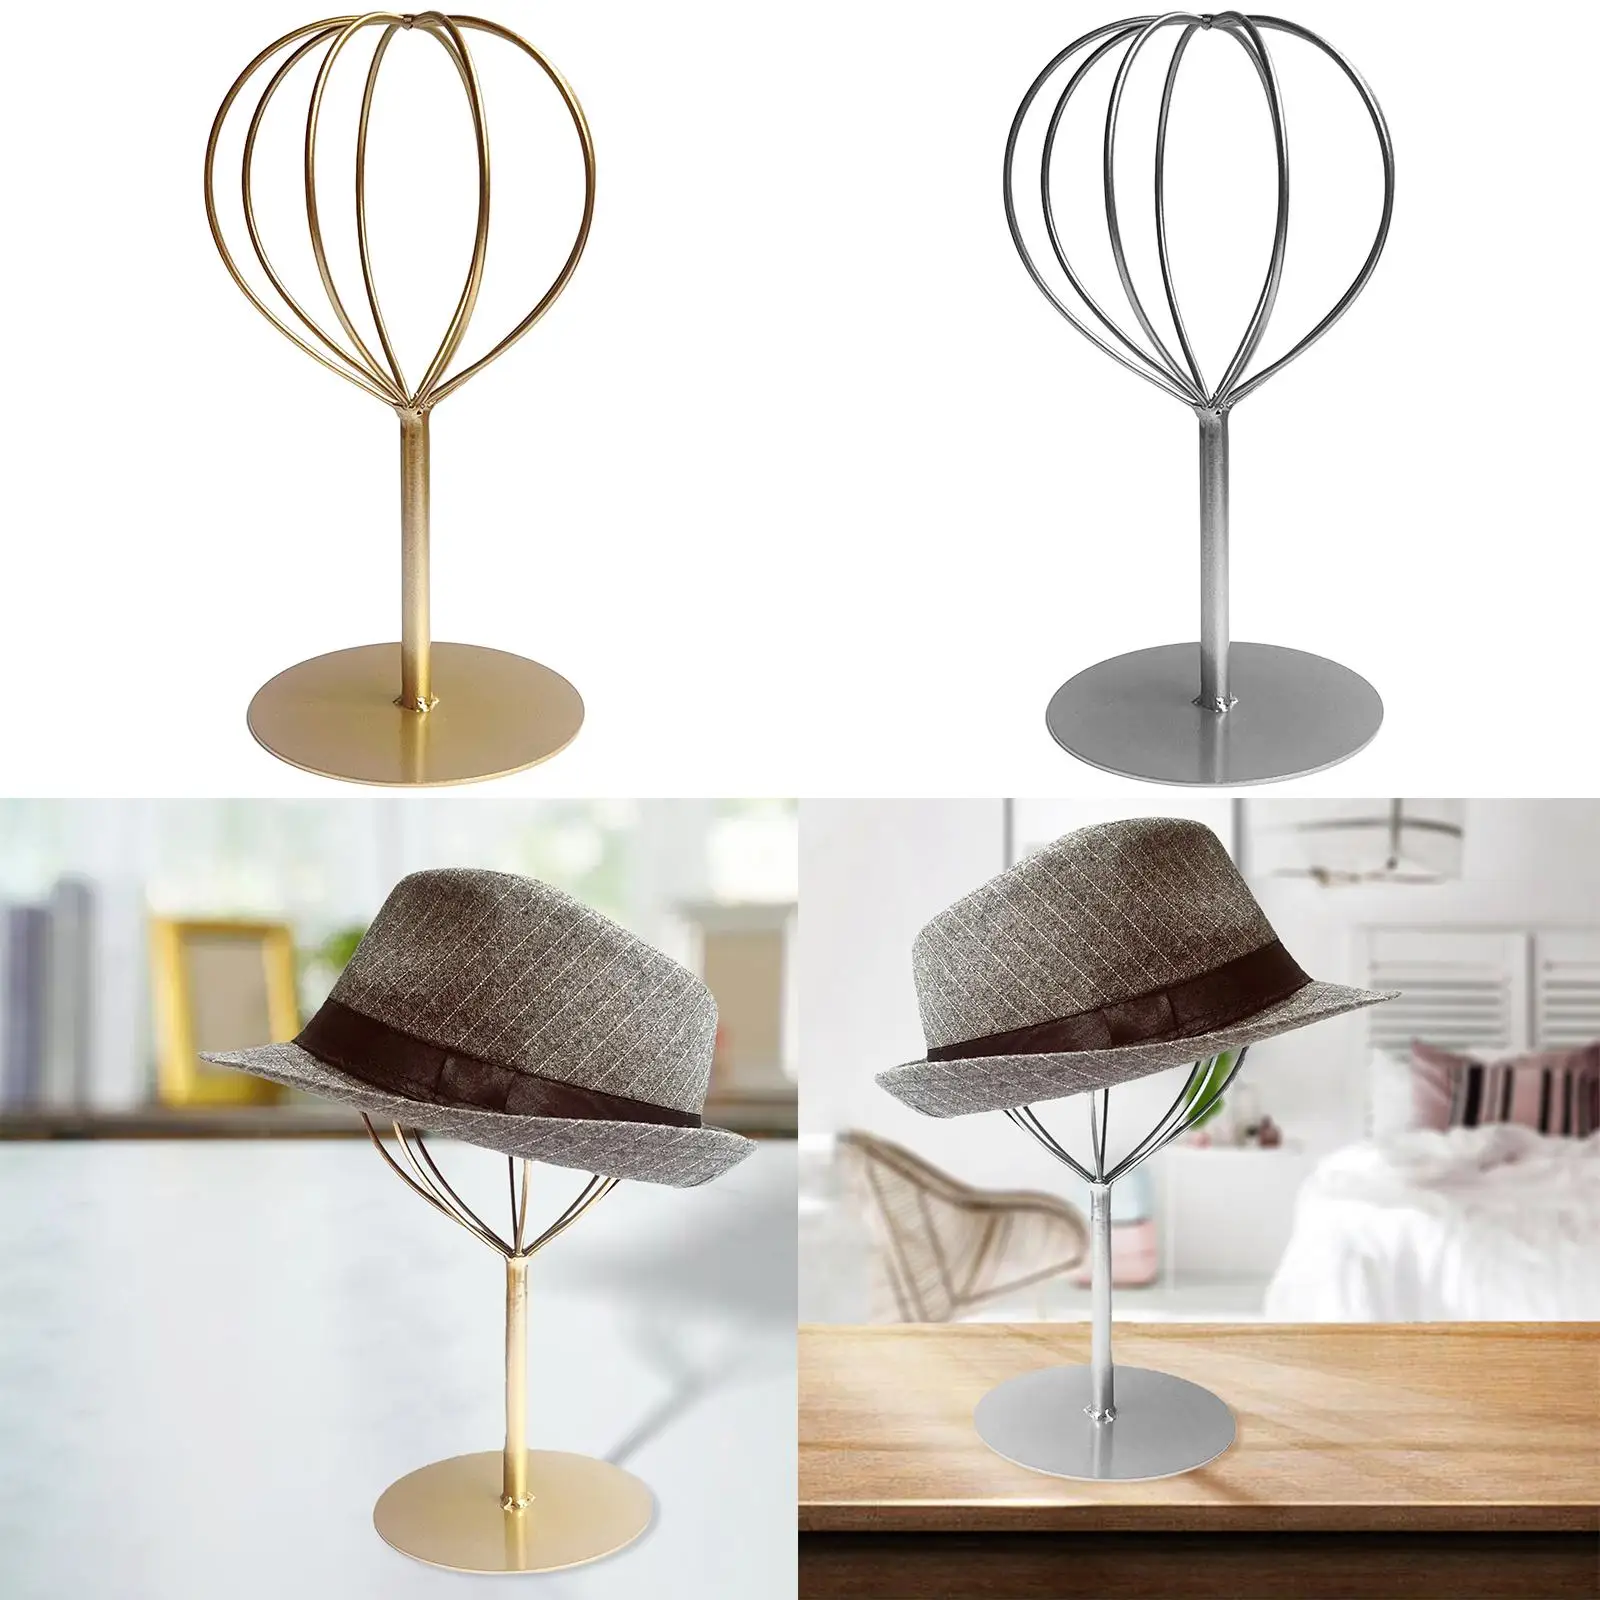 Wig Display Stand Iron Freestanding Stable Balloon Shape Holder Rack Hat Stand Display Storage Stand for Display Decoration